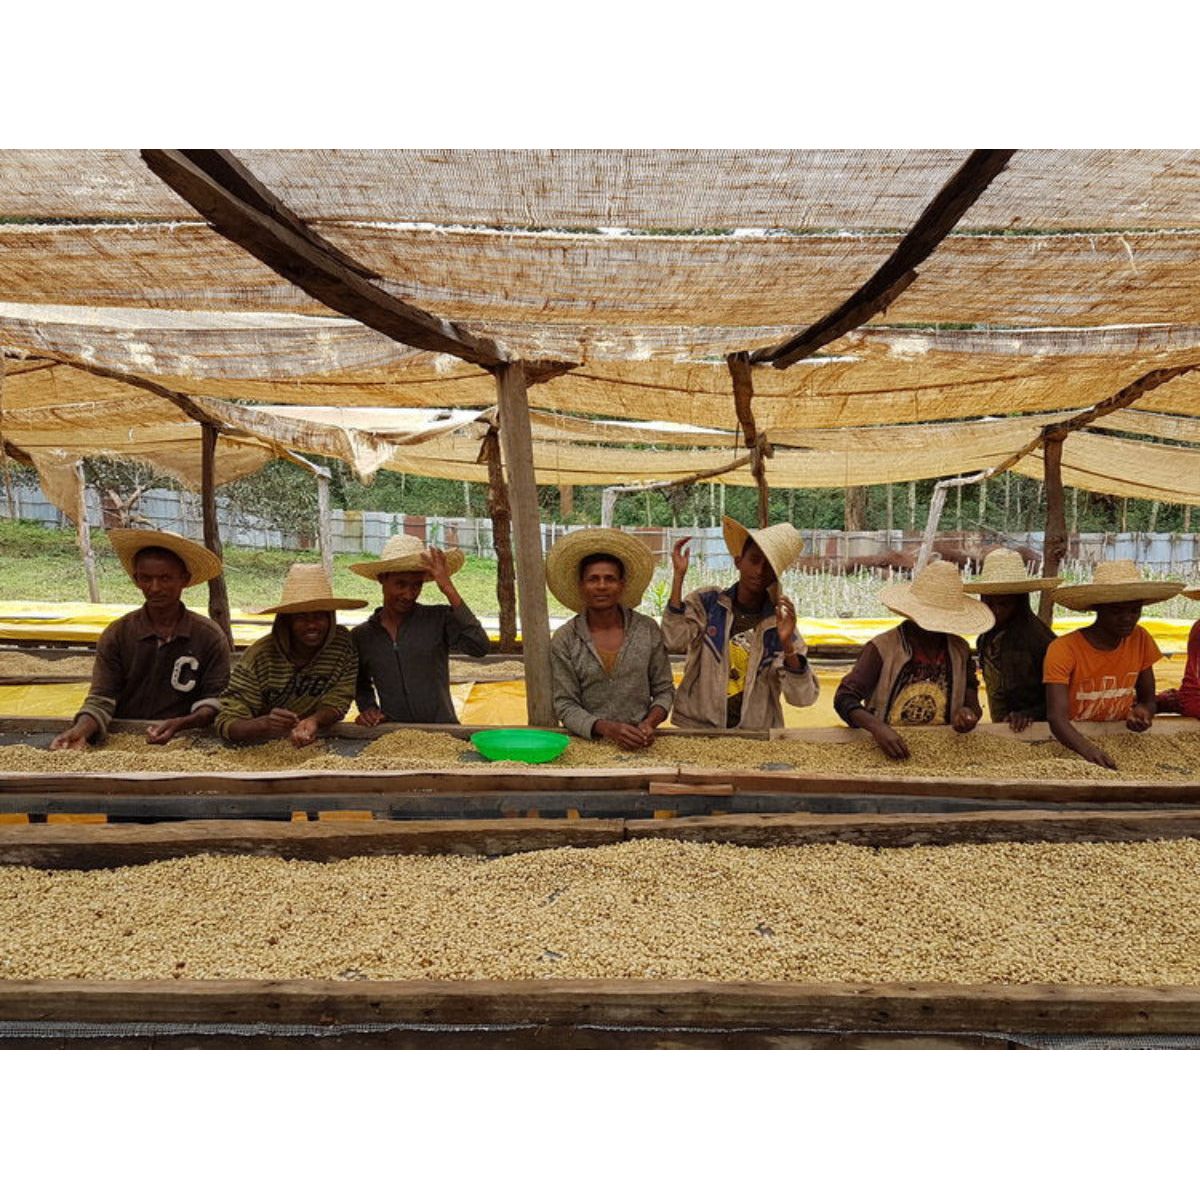 abba-olly-ethiopia-specialty-coffee-drying-and-sorting-coffee-